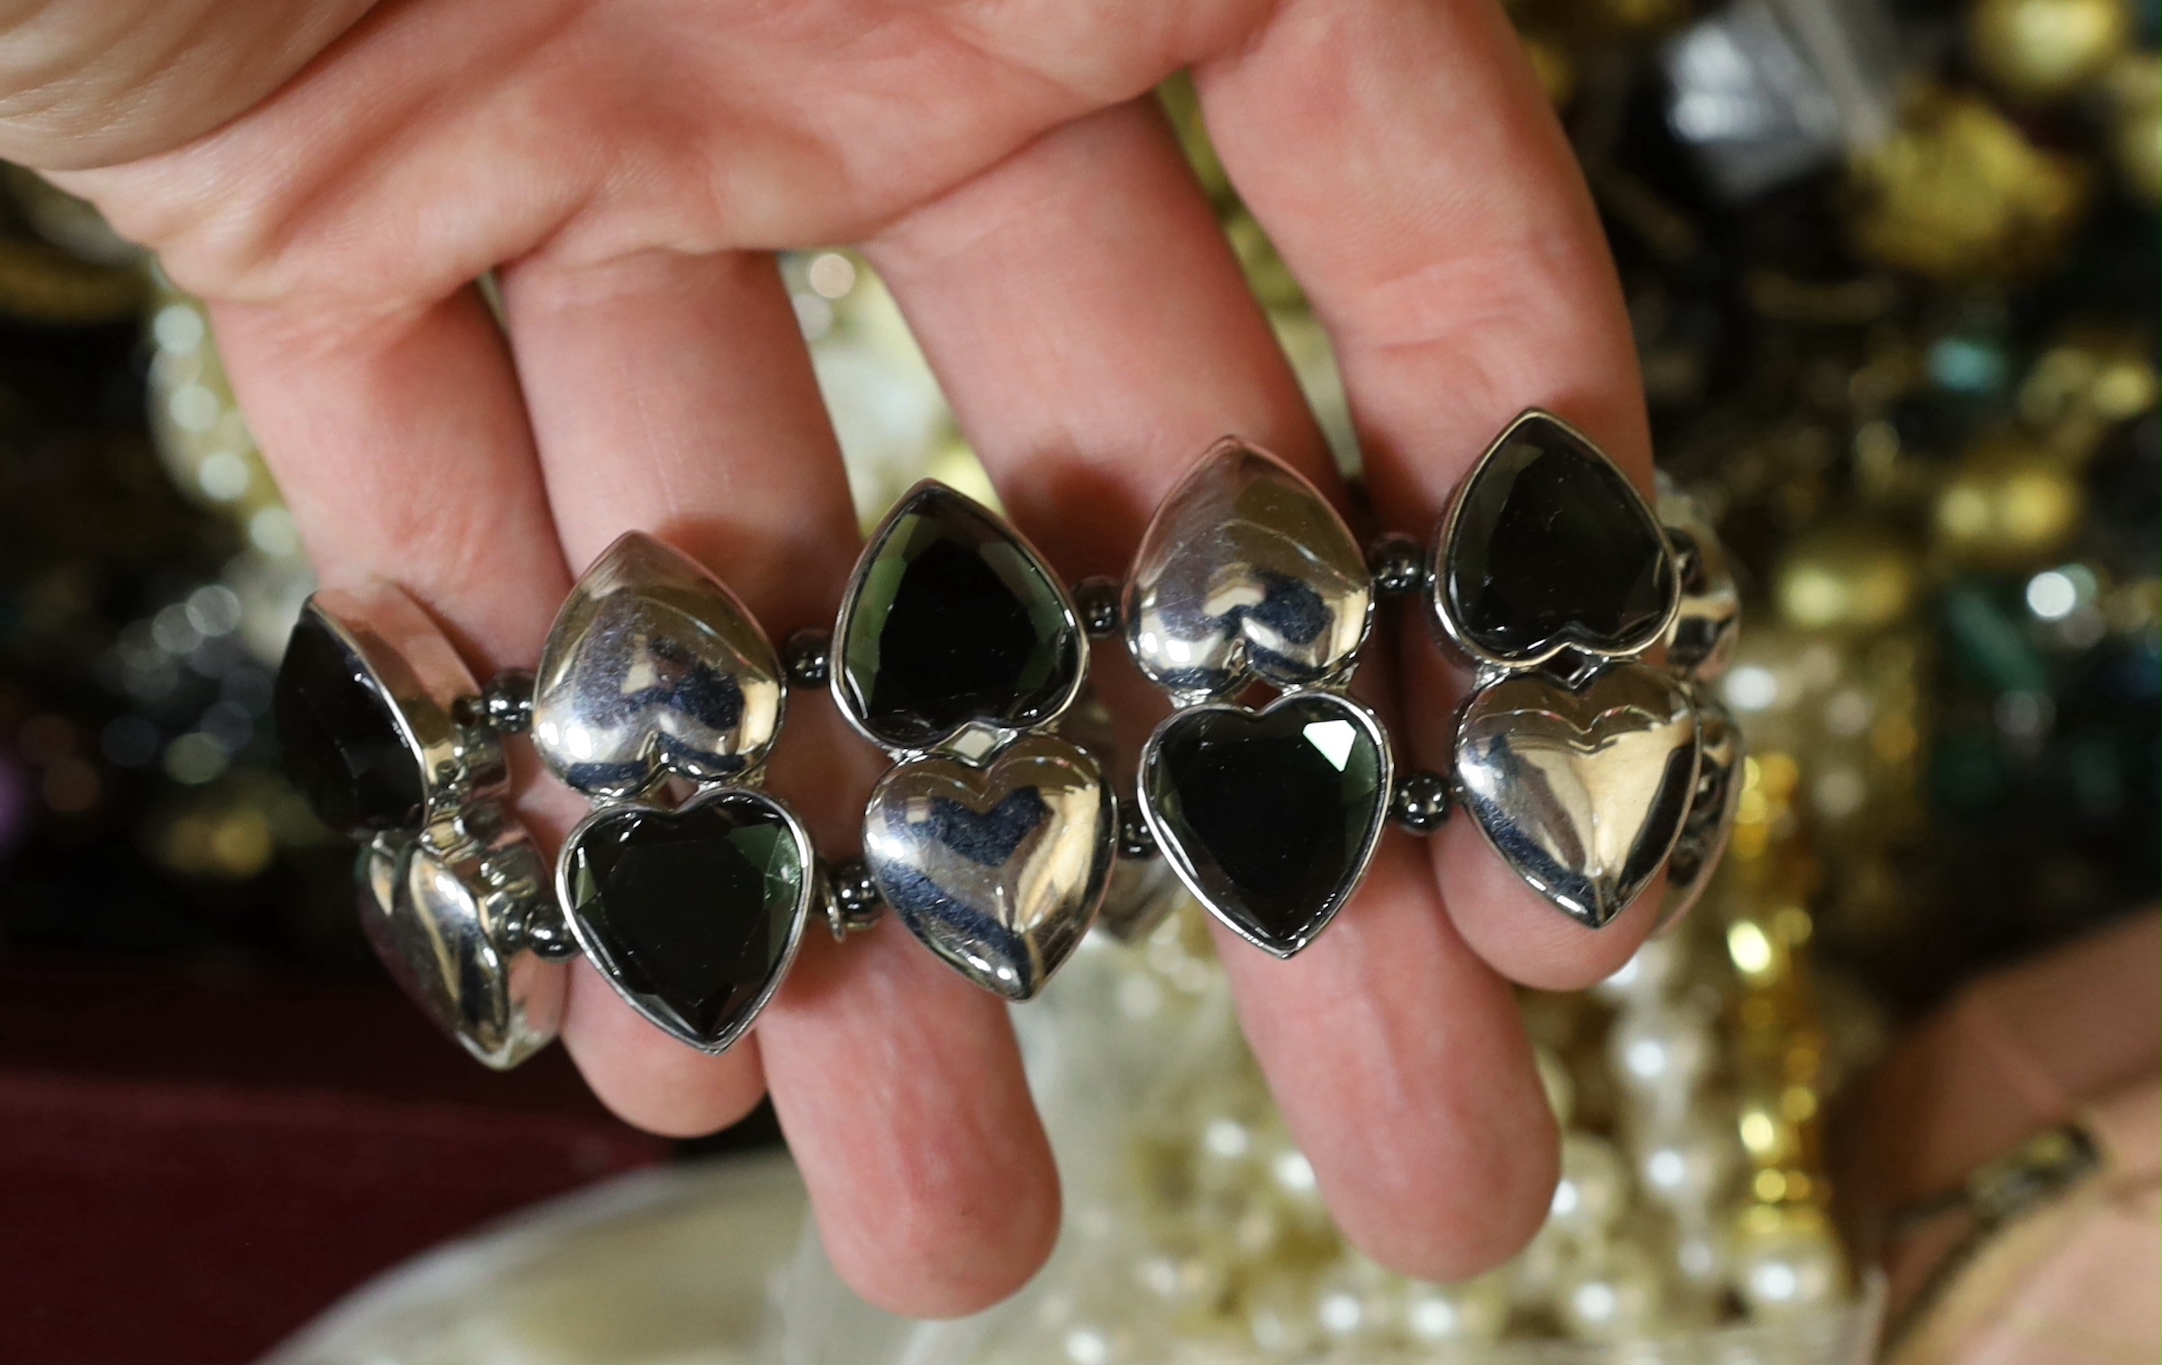 A large quantity of assorted mainly modern costume jewellery.